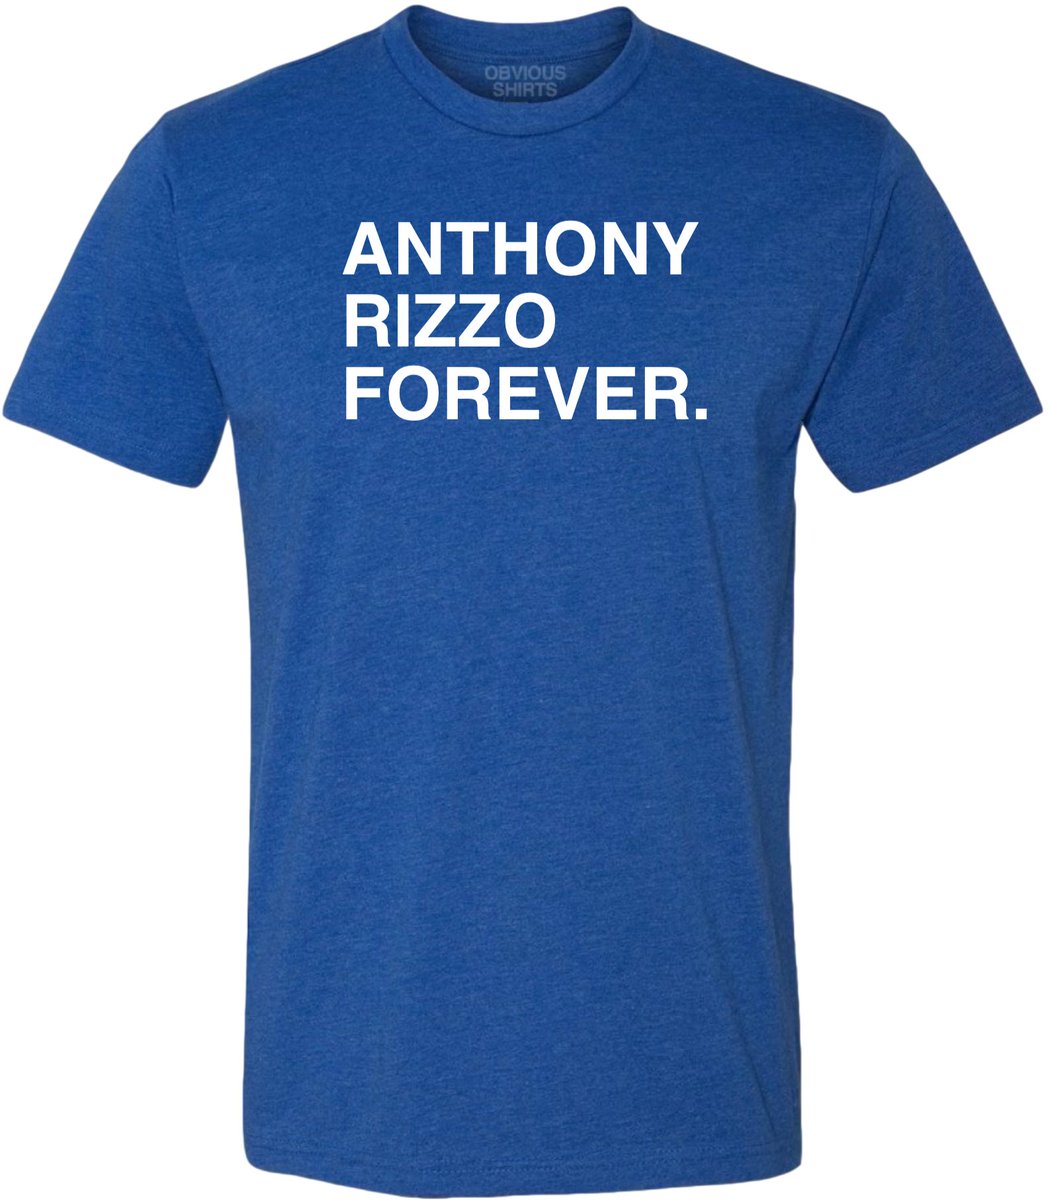 Anthony Rizzo Forever. Thank you for everything, Captain. #44ever obviousshirts.com/collections/fo…